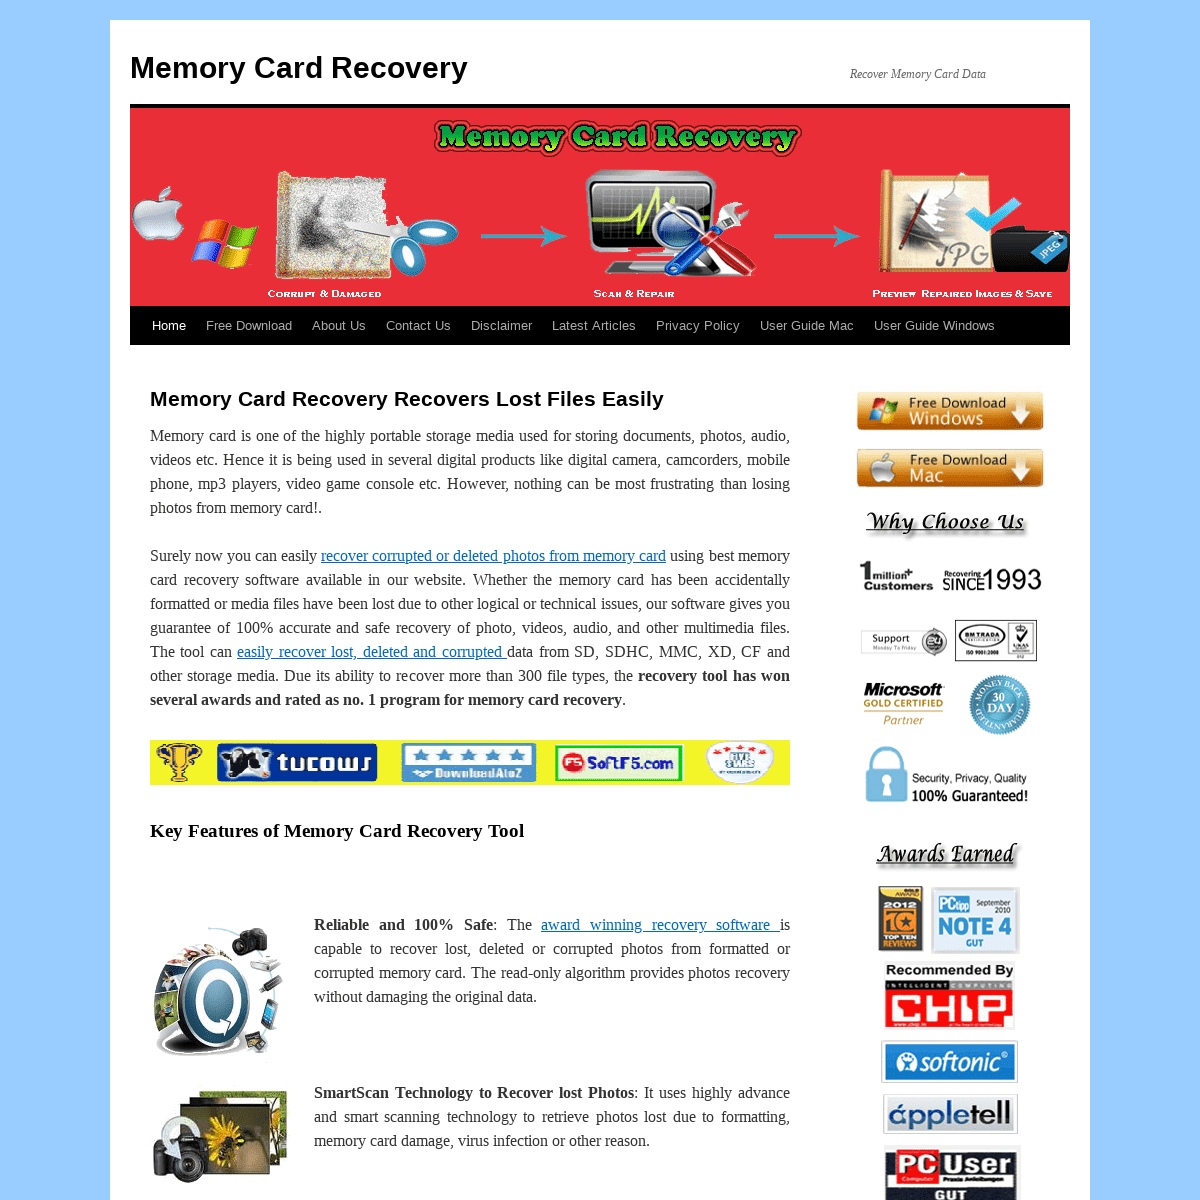 Memory Card Recovery | Recover Memory Card Data